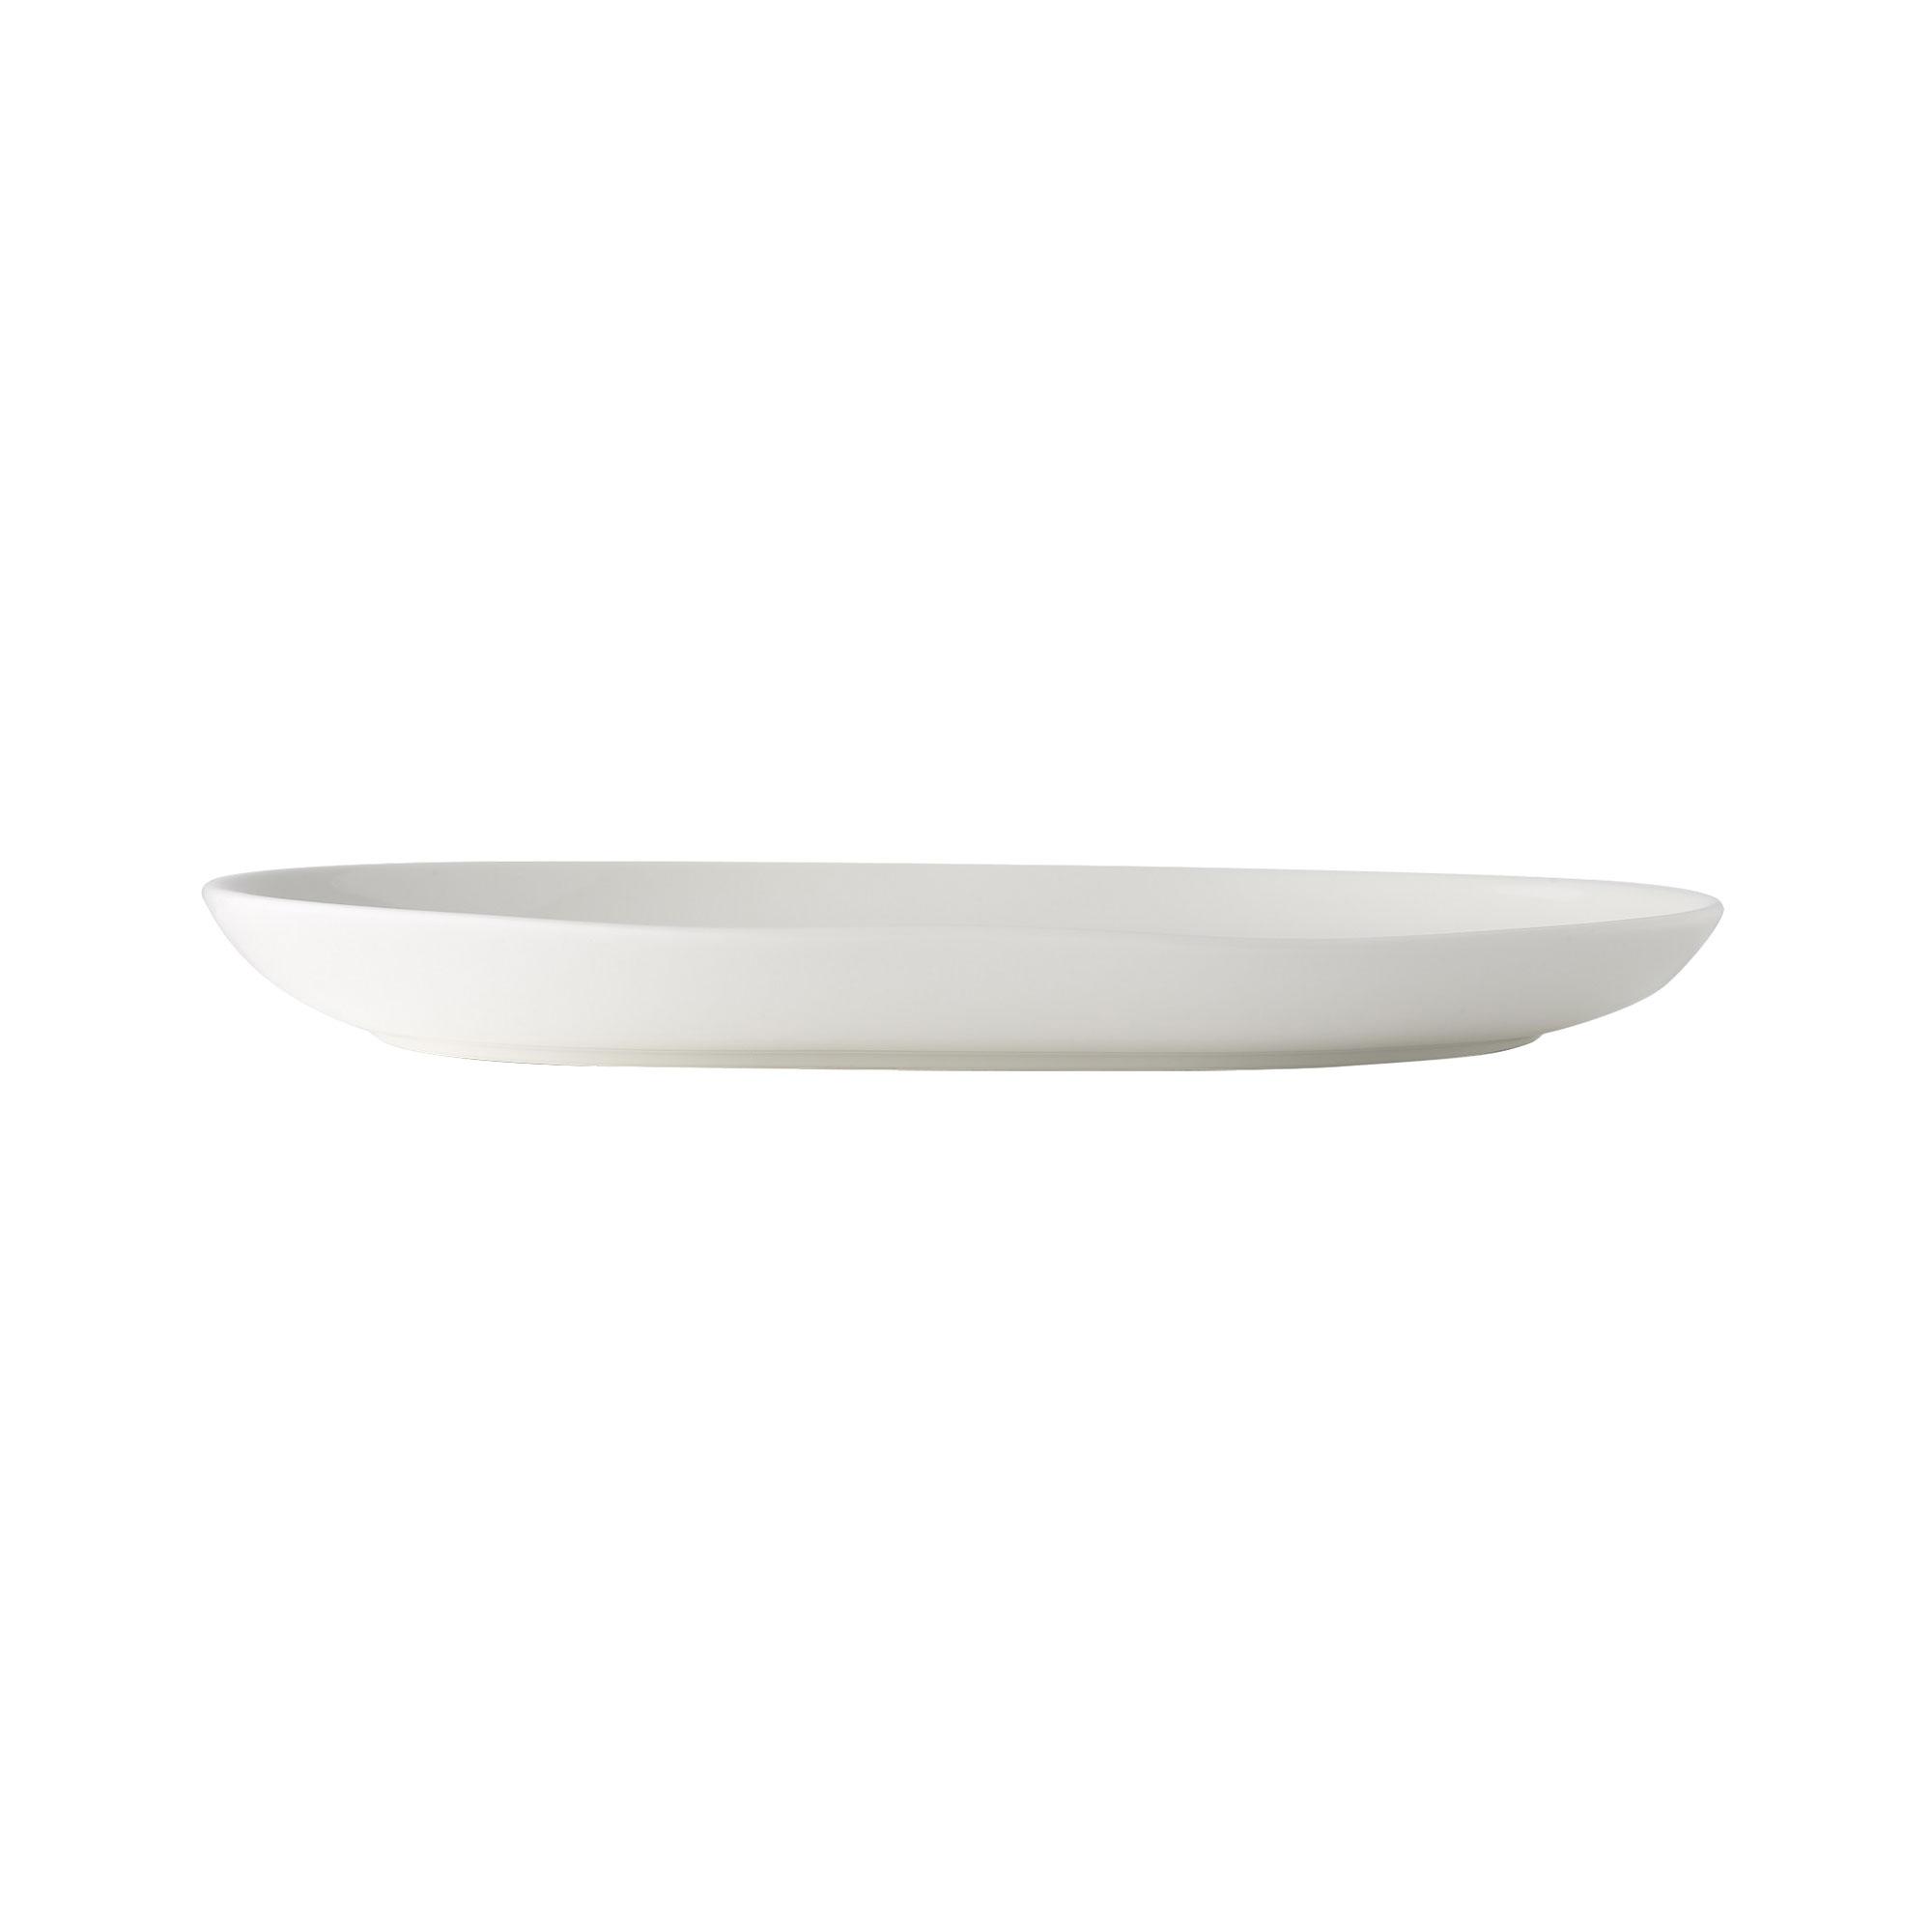 Noritake Everyday by Adam Liaw Oblong Serving Platter 25cm White Image 1